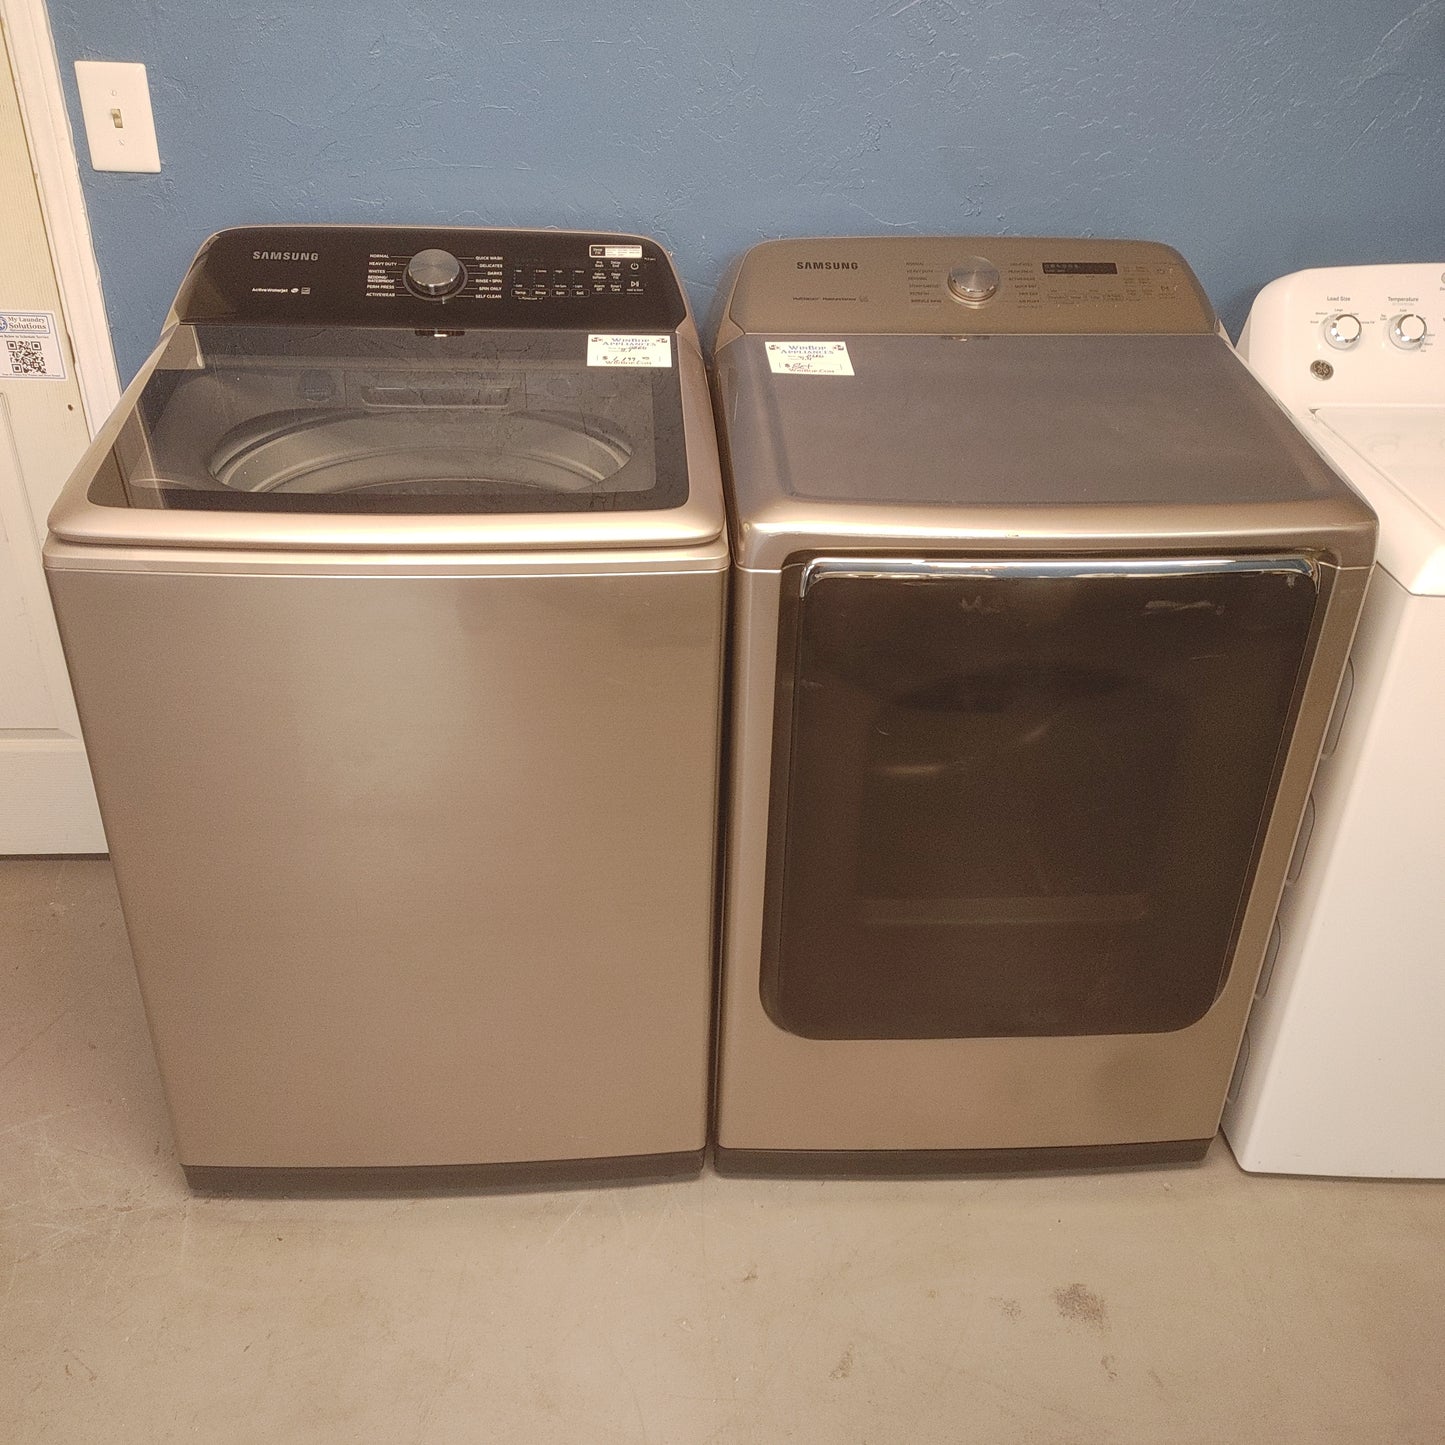 Used Samsung Rose Gold 5.1 cubic ft Top load Washer and 7.4 cubic ft Electric Steam Dryer set